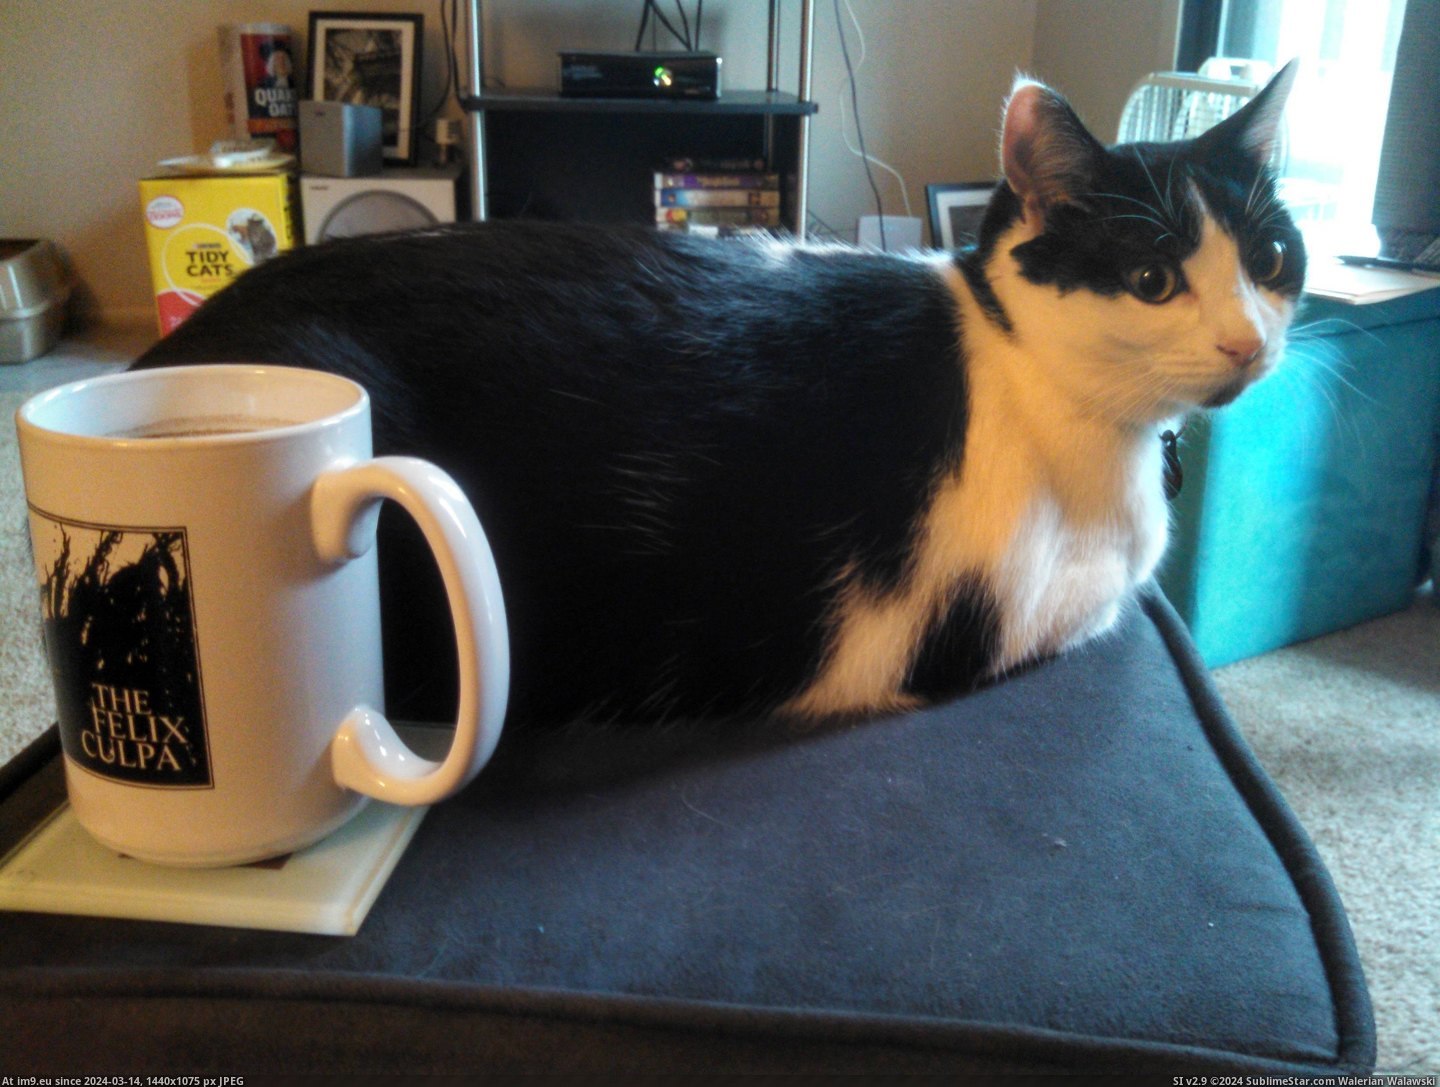 #Cats #Coffee #Buttwarmer #Calls #Zoey [Cats] I call it coffee, Zoey calls it a buttwarmer. Pic. (Obraz z album My r/CATS favs))